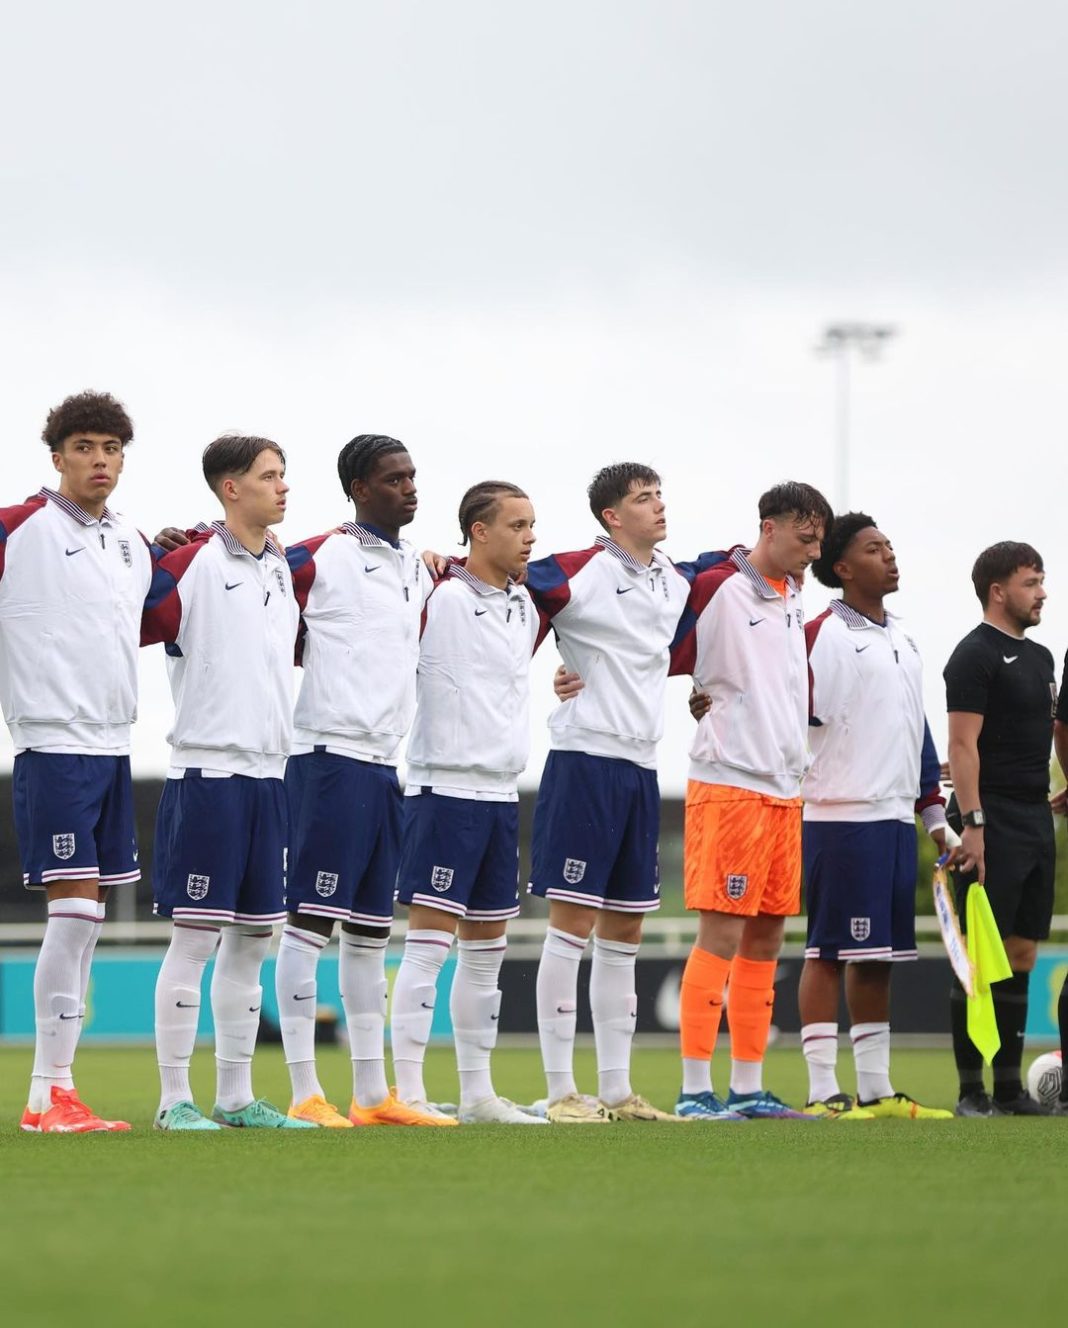 Ayden Heaven (3L) and Myles Lewis-Skelly (2R) lineup before a game for the England u18s (Photo via Heaven on Instagram)